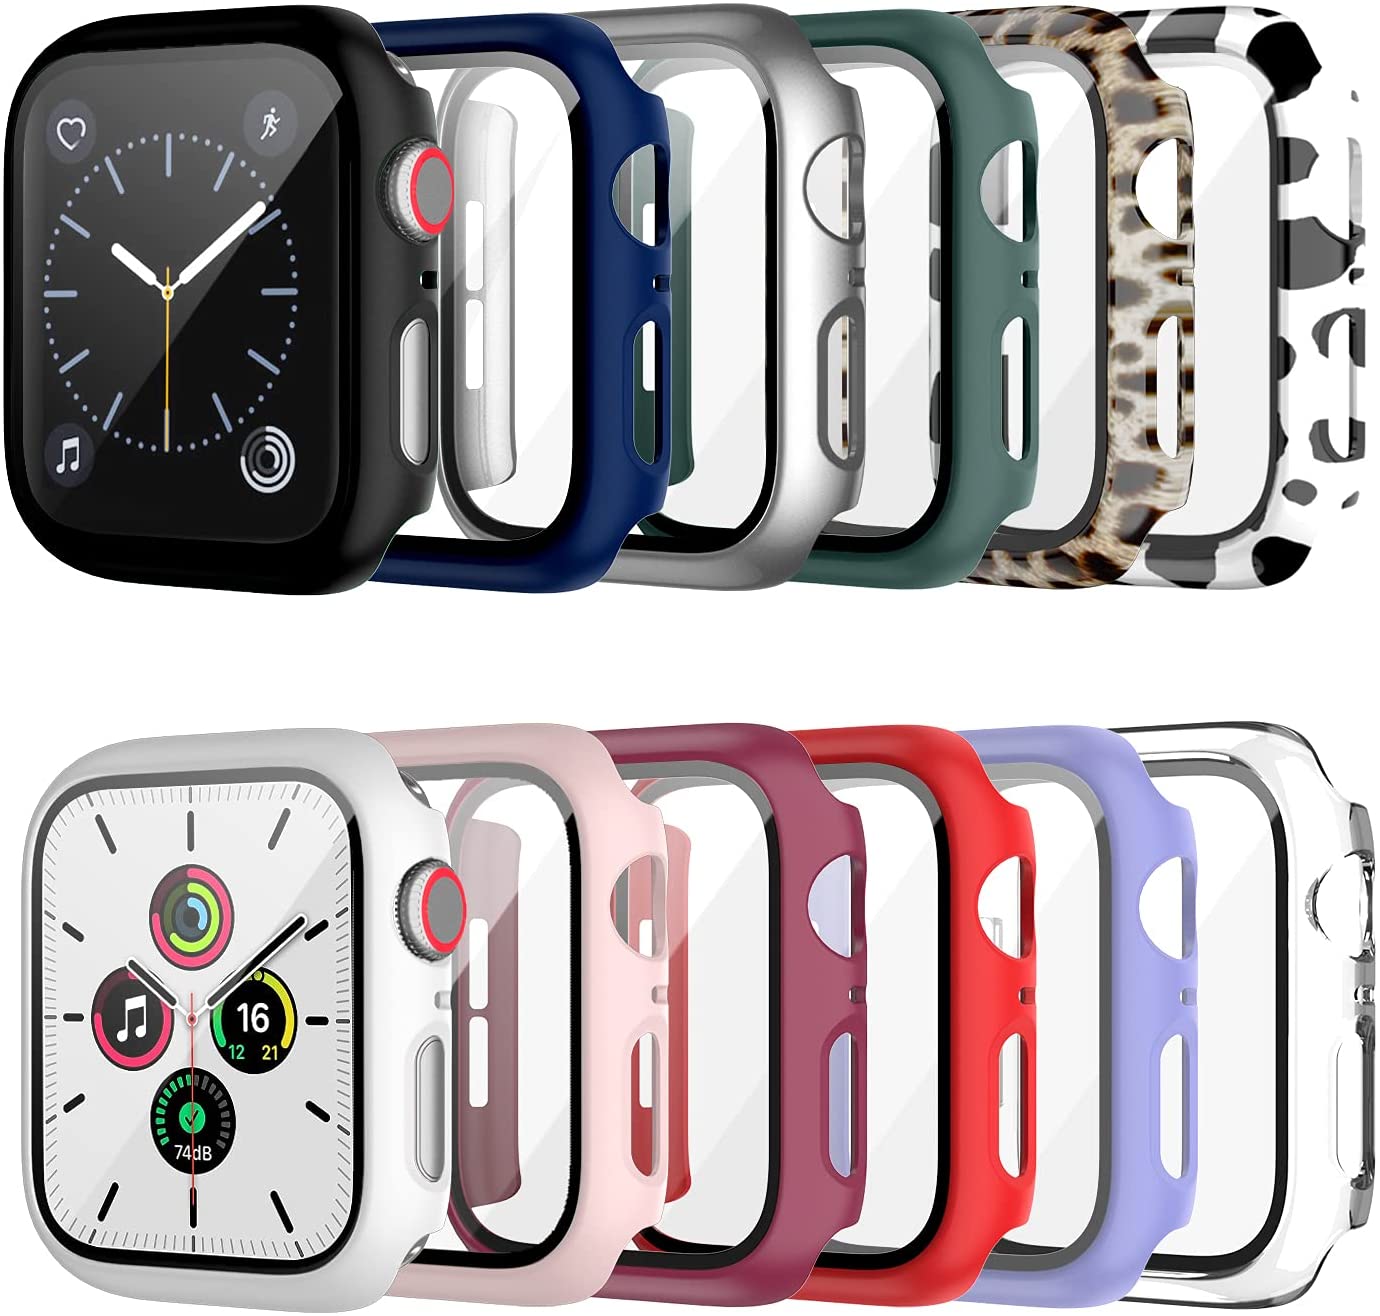 apple watch protector multi pack